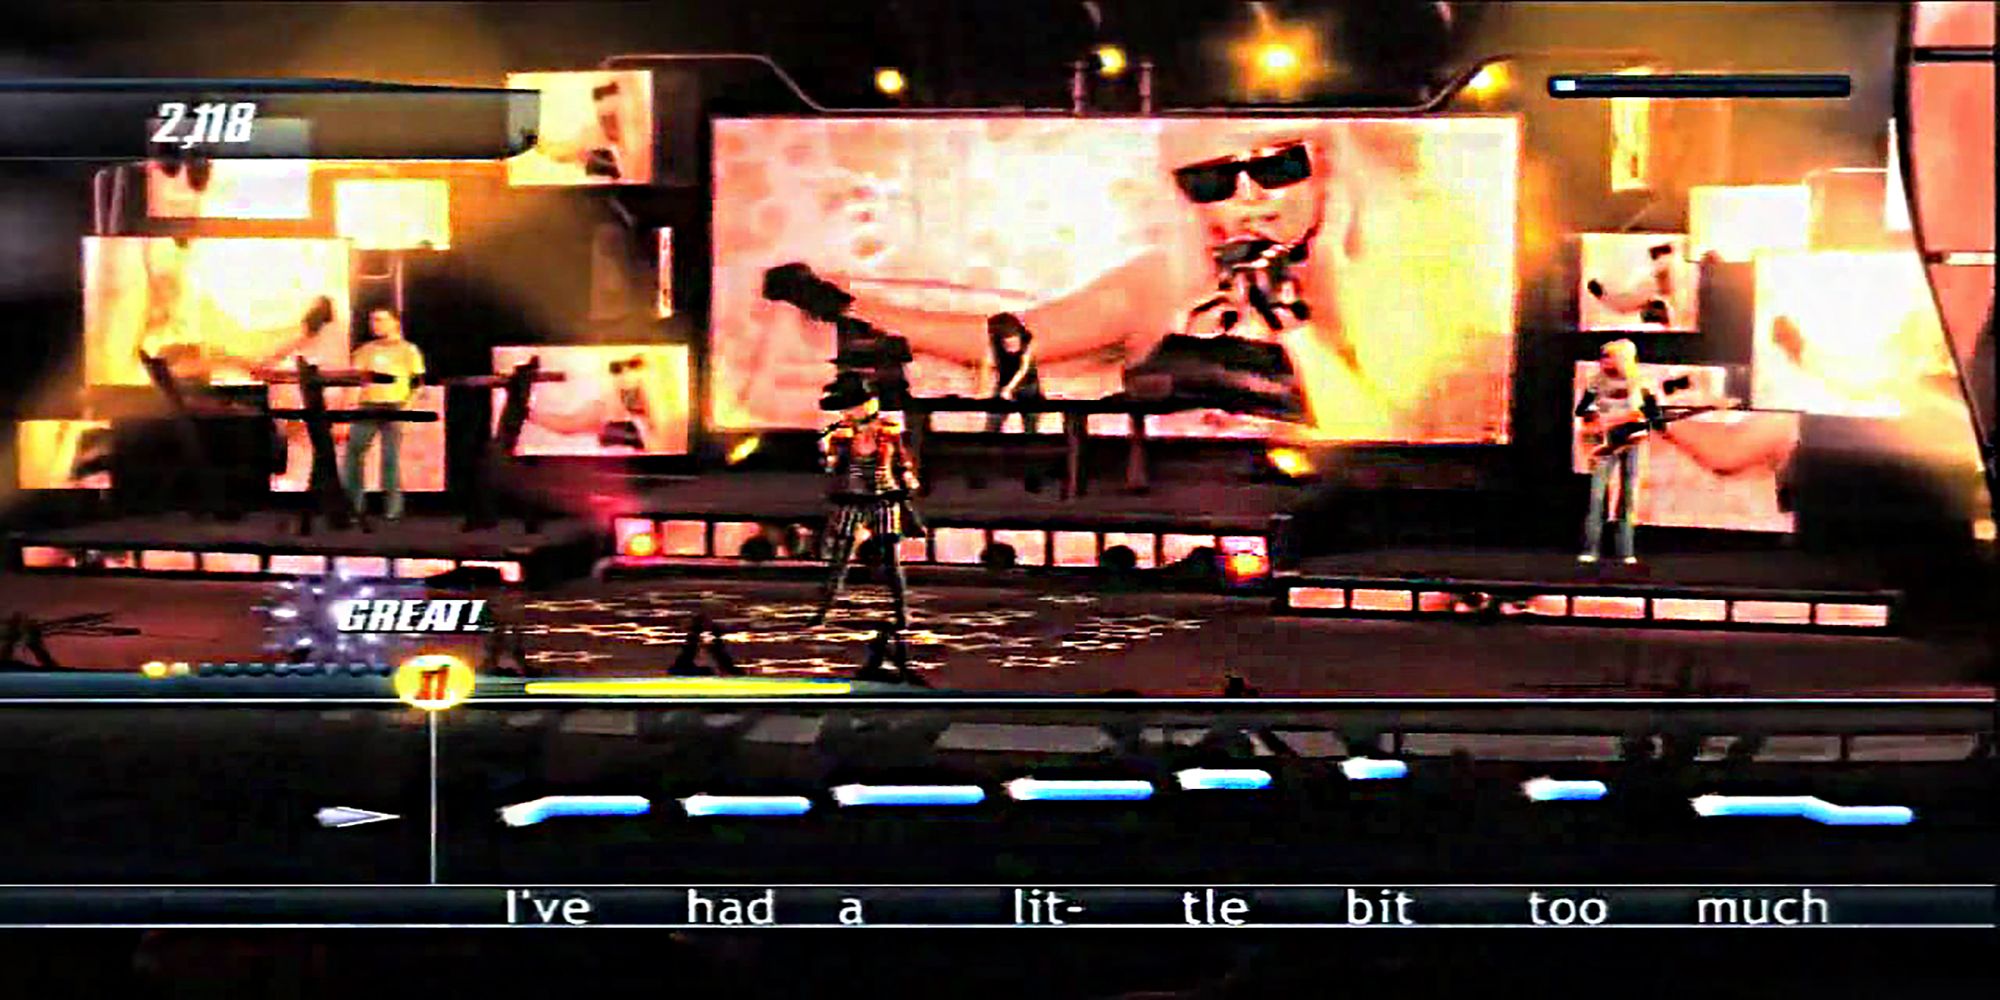 A top-hat adorned superstar sings on a concert stage with Lady Gaga's Poker Face music video in the background in Karaoke Revolution Wii.